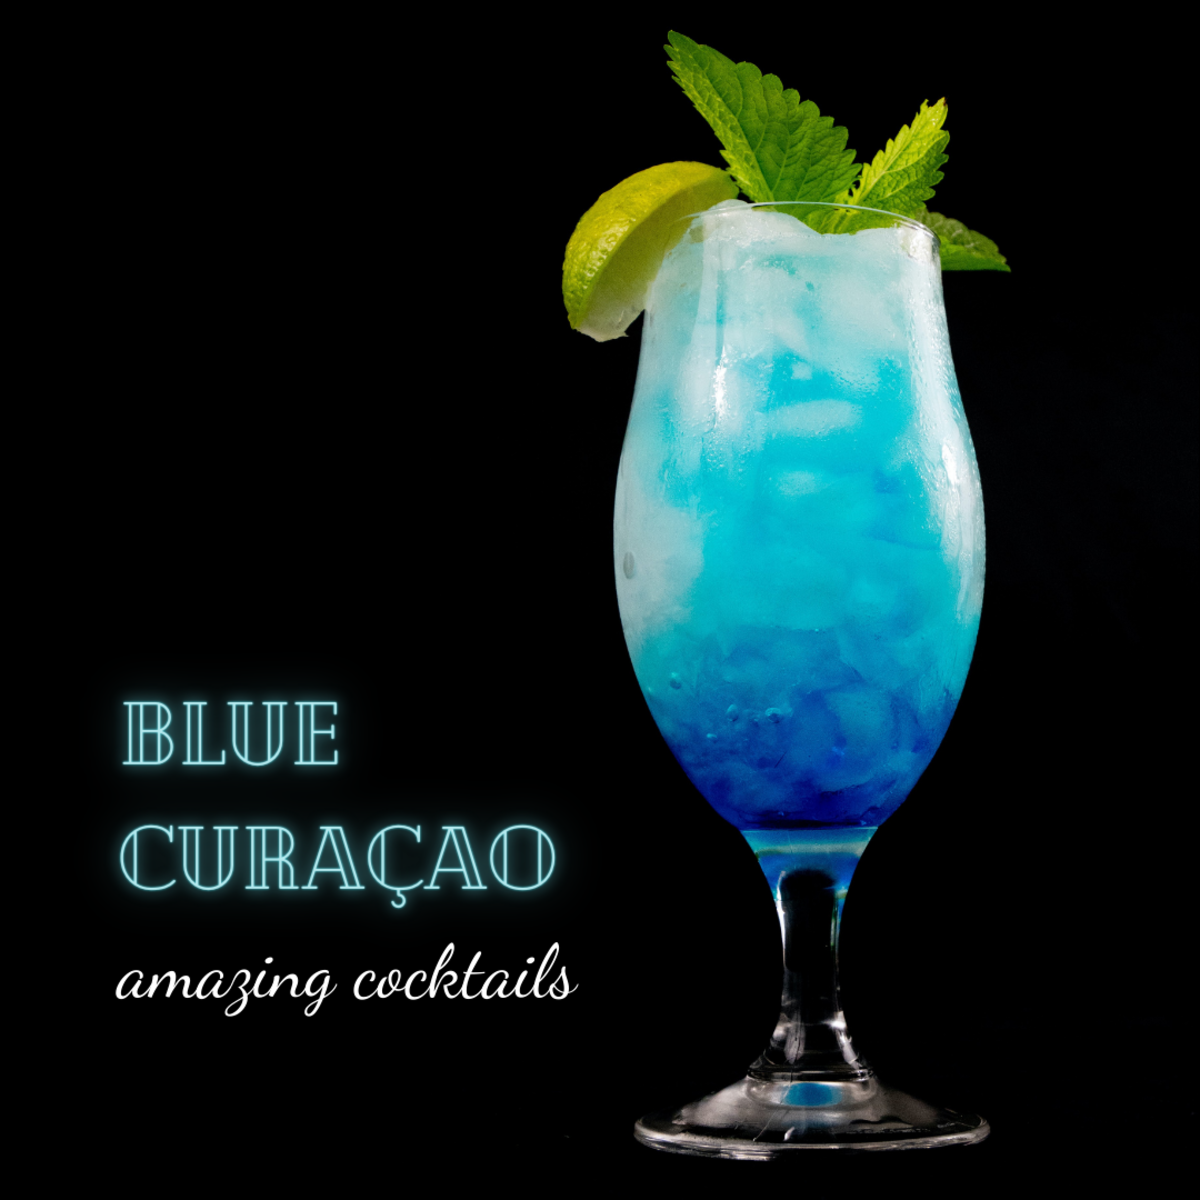 Beautiful and refreshing, blue curaçao cocktails are a fabulous option for dinner parties or gatherings.